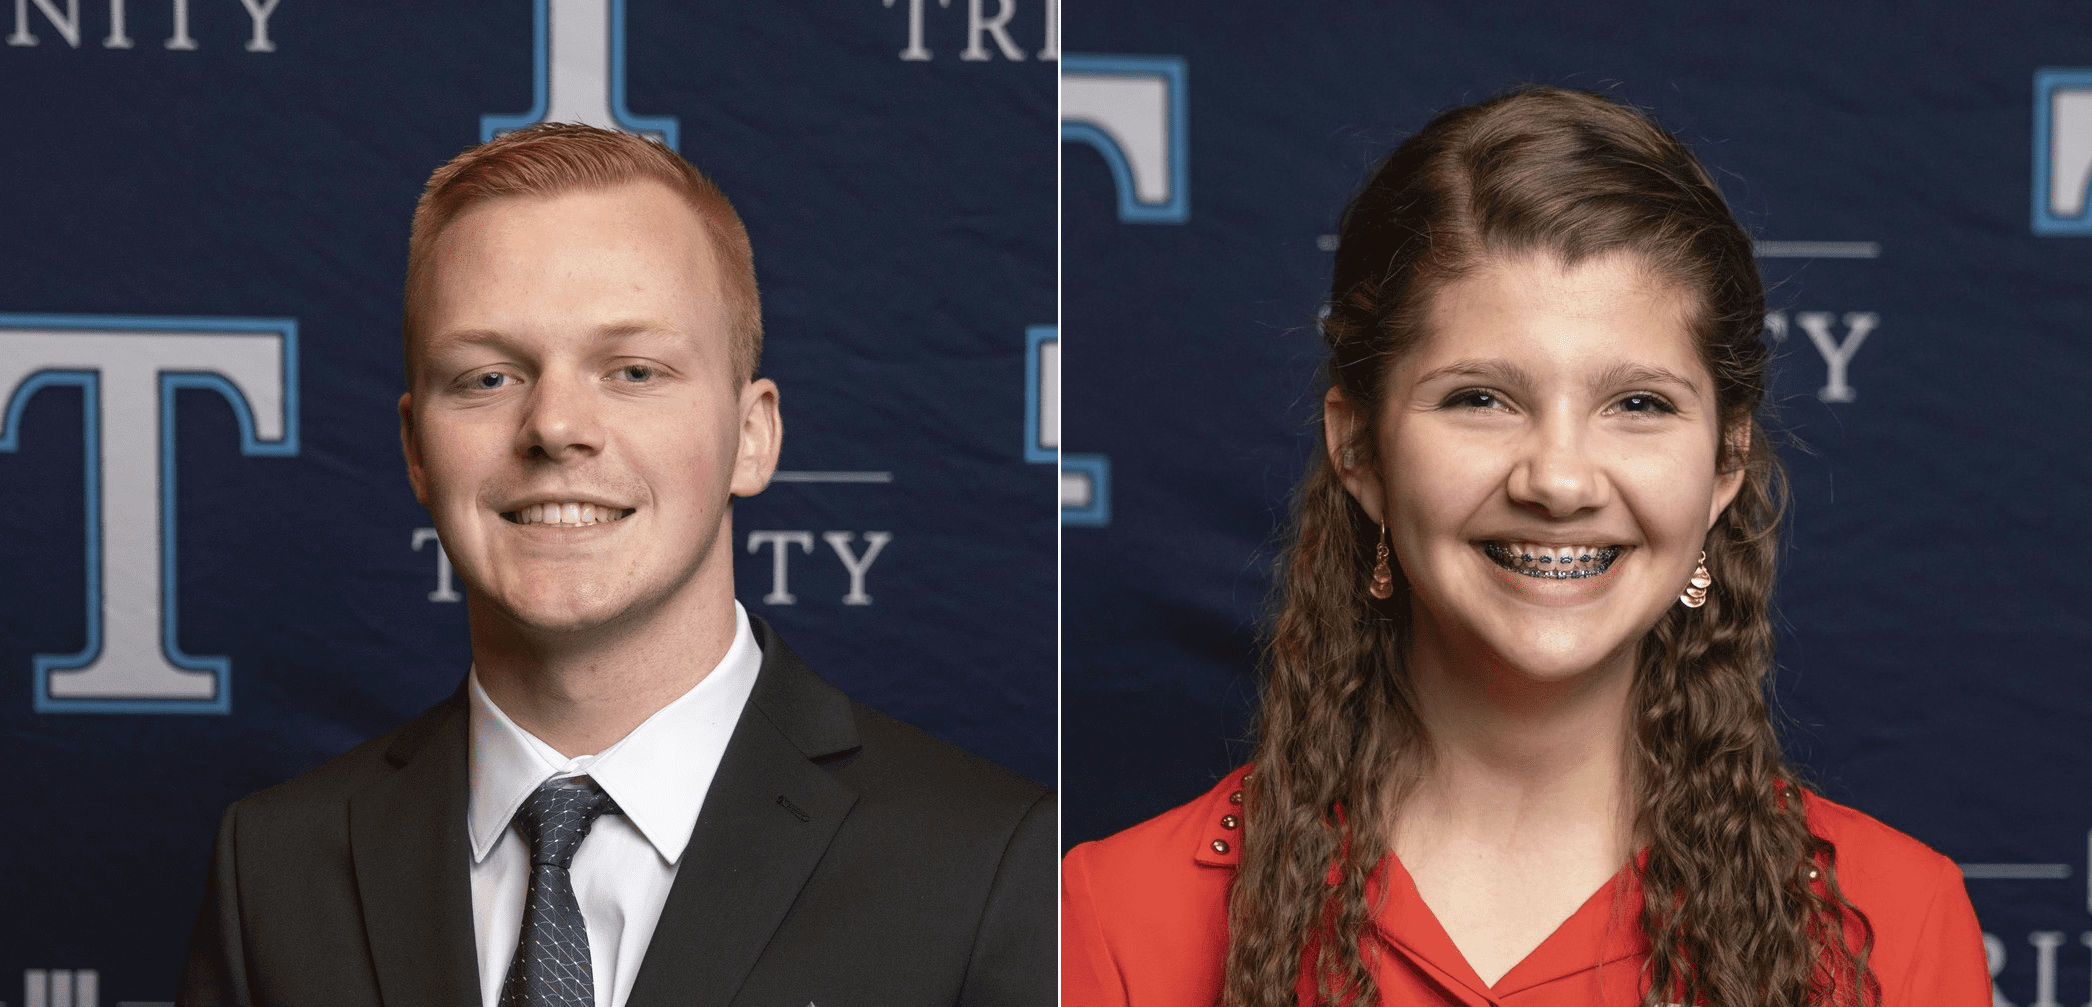 Evan Senti of Escondido, Calif., and Sophia Lang of Palmyra, Neb., have been named the College's 2019 Founders’ Scholars.